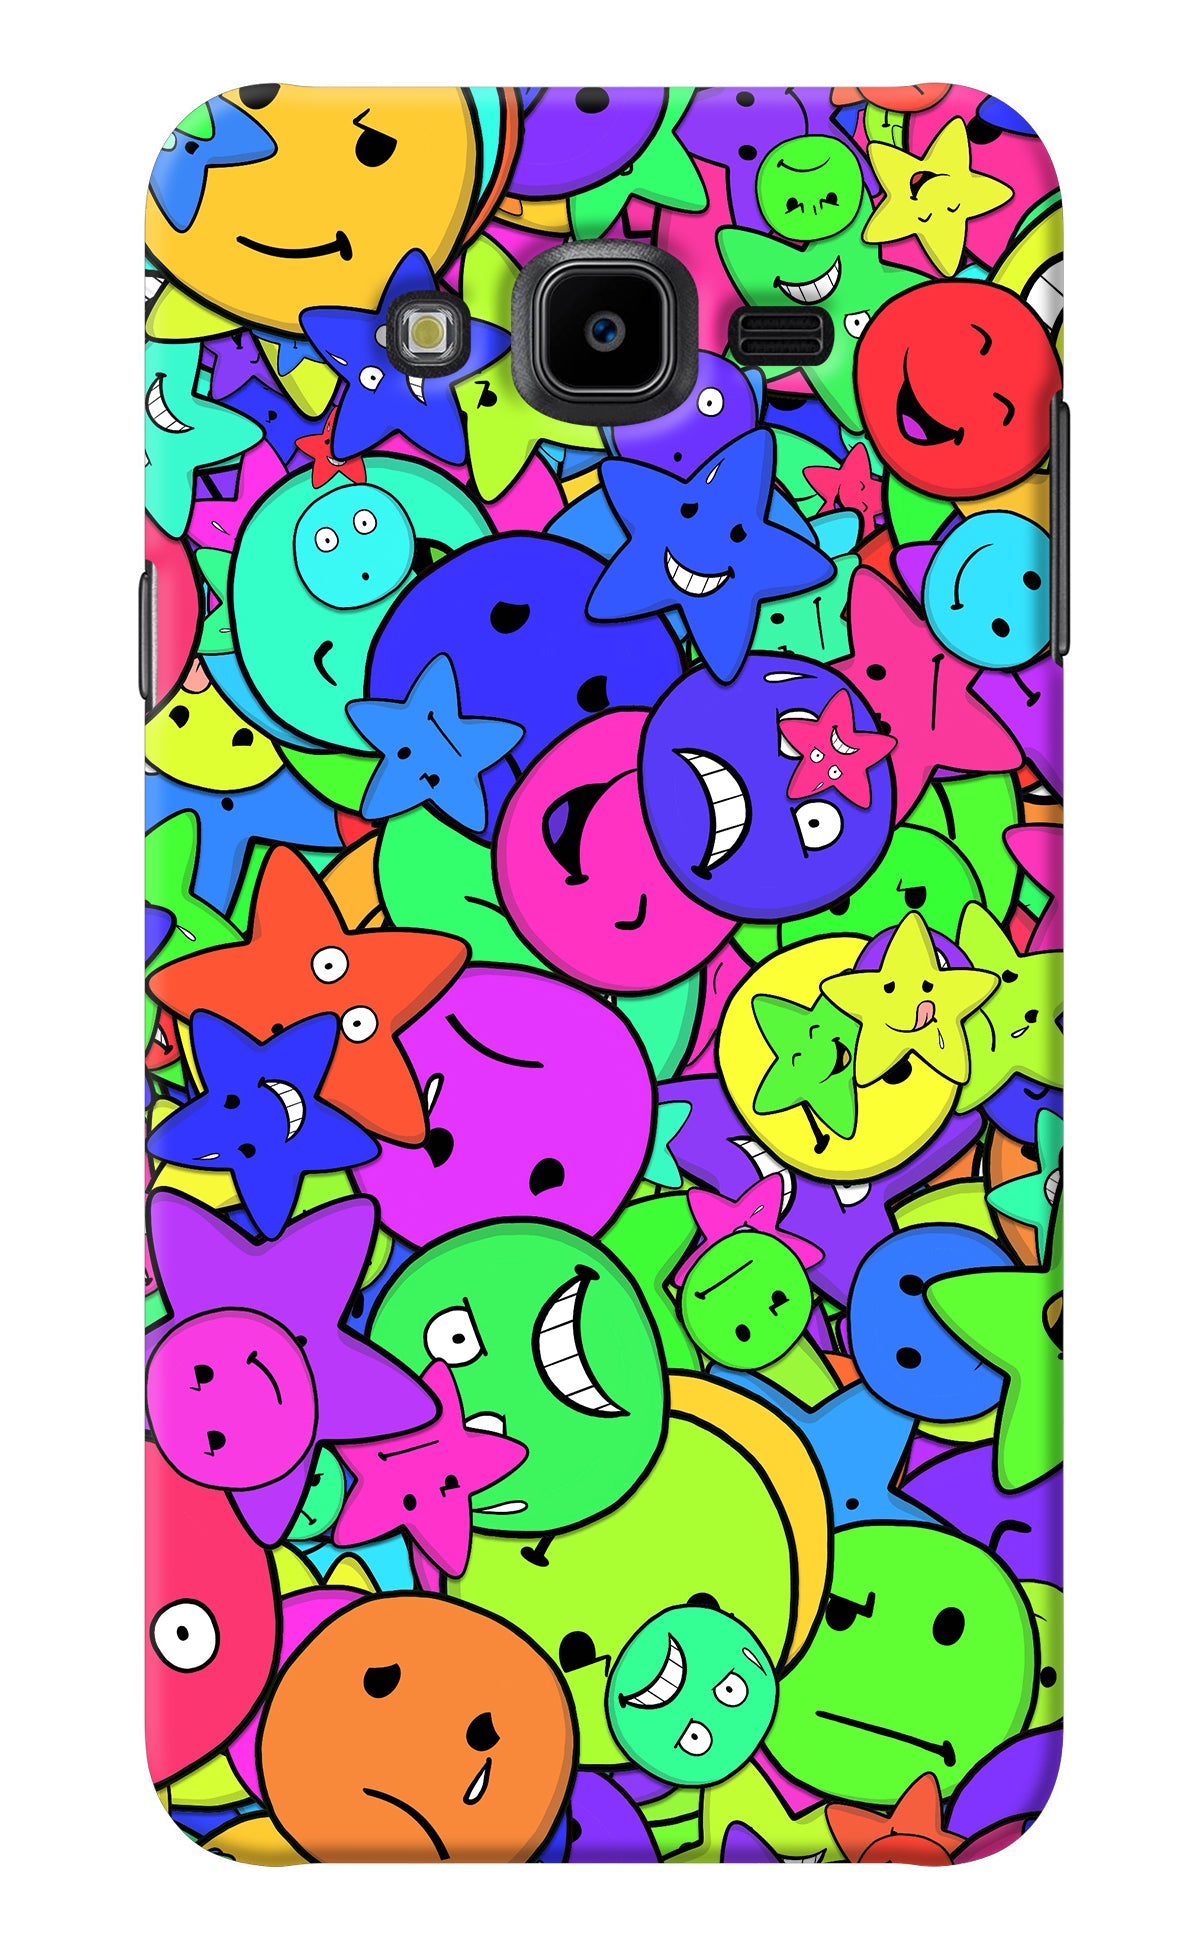 Fun Doodle Samsung J7 Nxt Back Cover